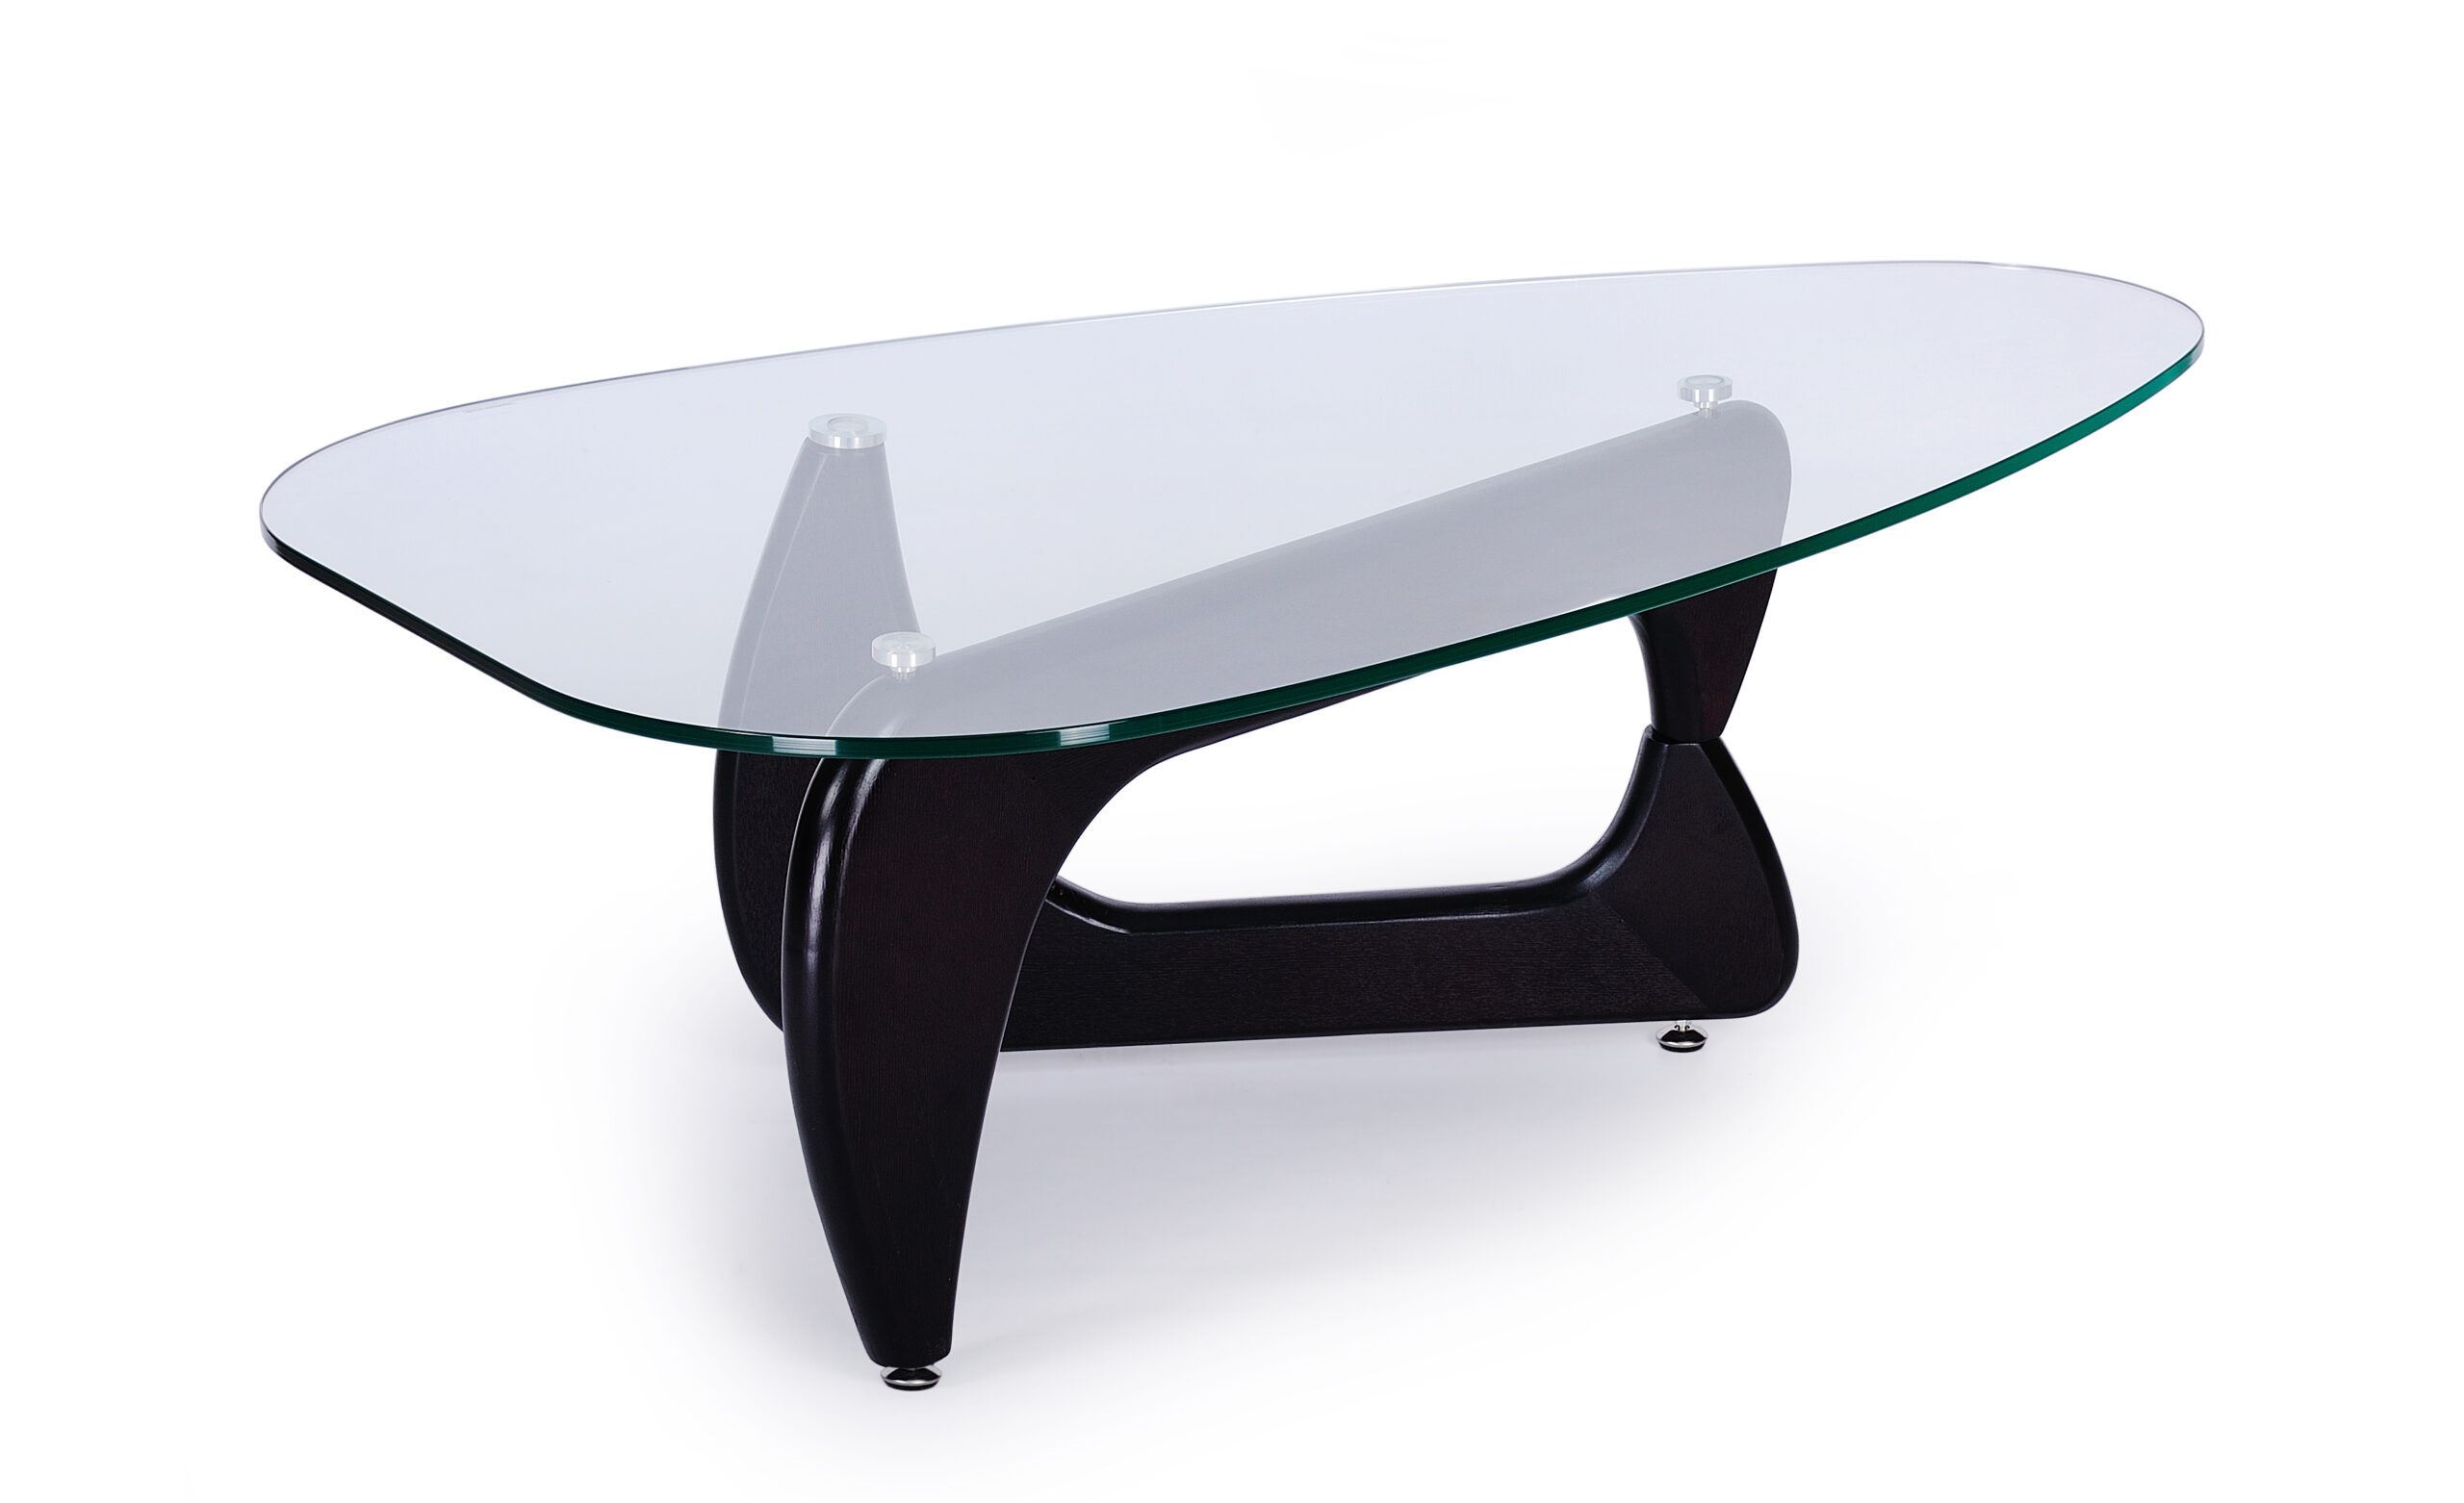 https://palaceofglass.com/wp-content/uploads/2014/11/Custom-Glass-Table-Oval-Shaped-by-Palace-of-Glass-scaled.jpg